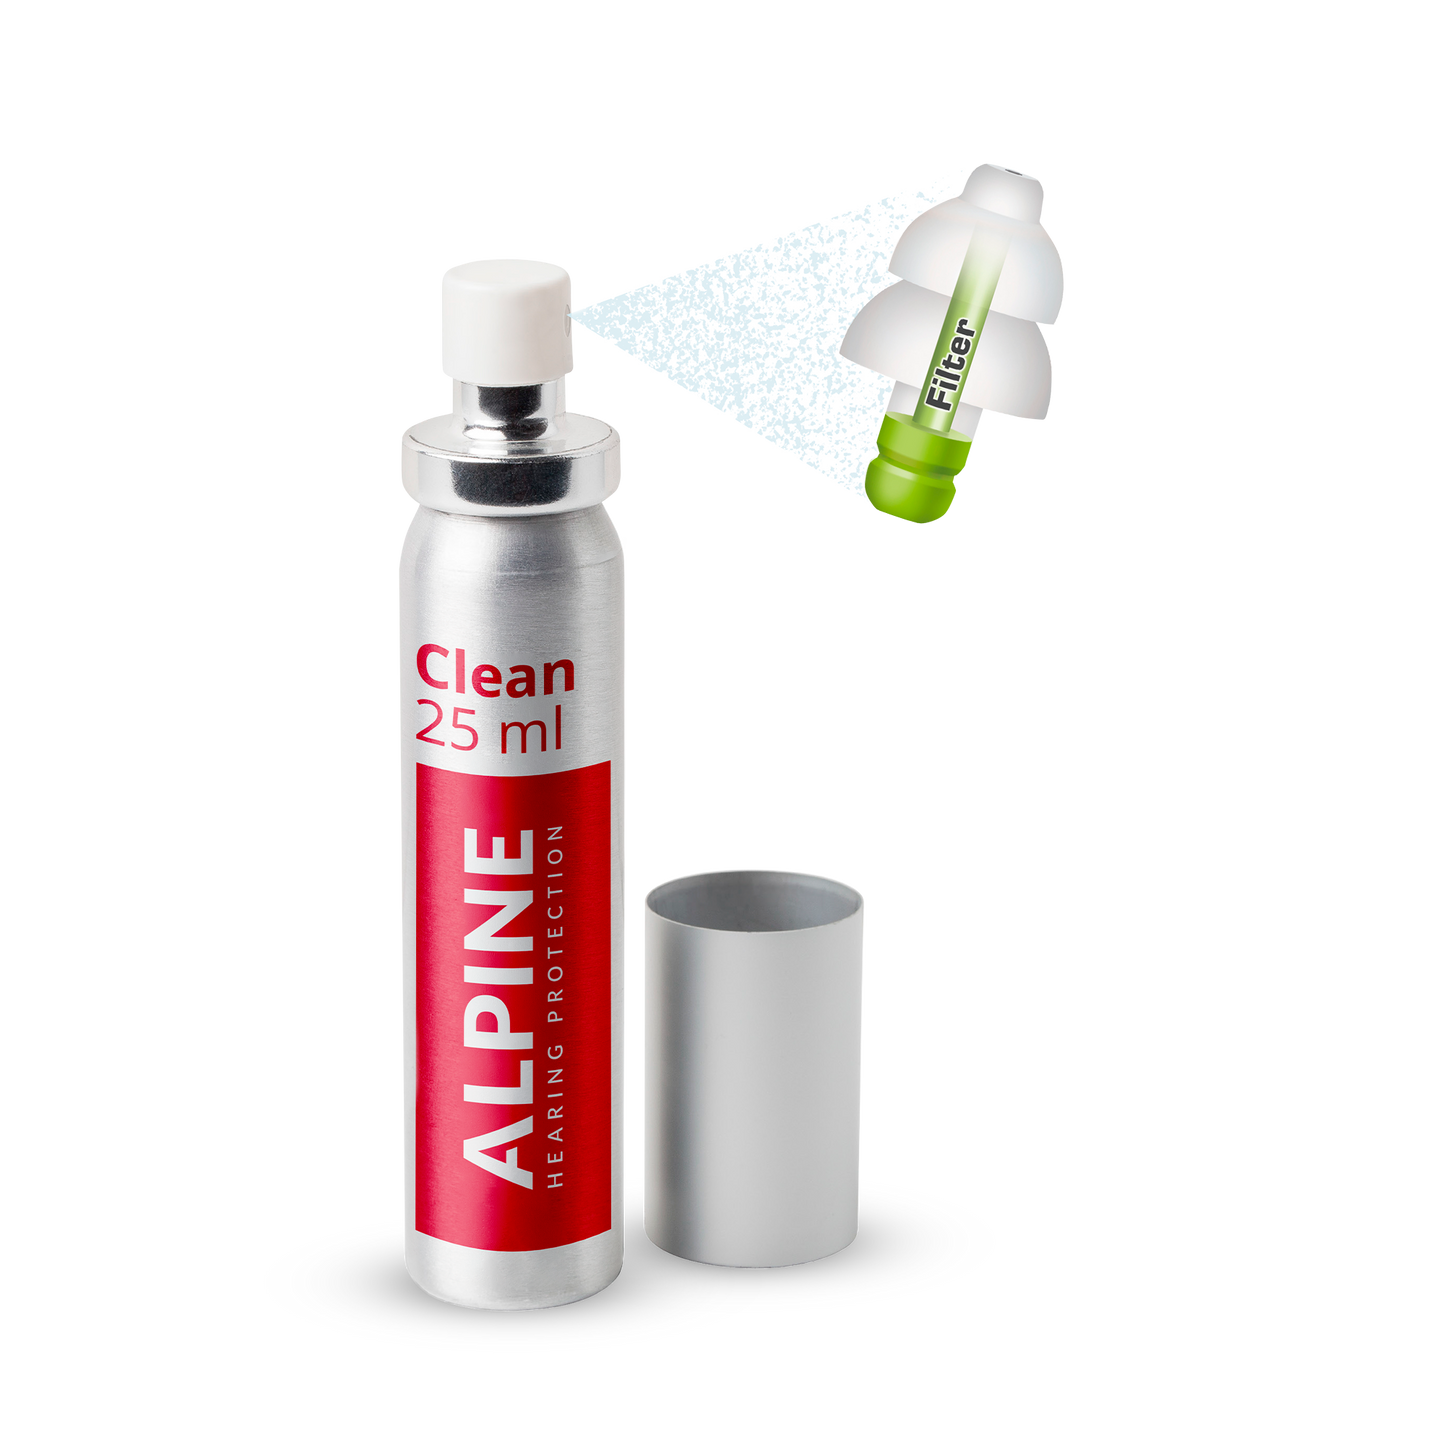 Alpine cleaning spray for cleaning ear protection Alpine hearing protection Earplugs earmuffs protect your ear red dot award party sleep motor baby kids music travel race DIY swim accessories project industry 